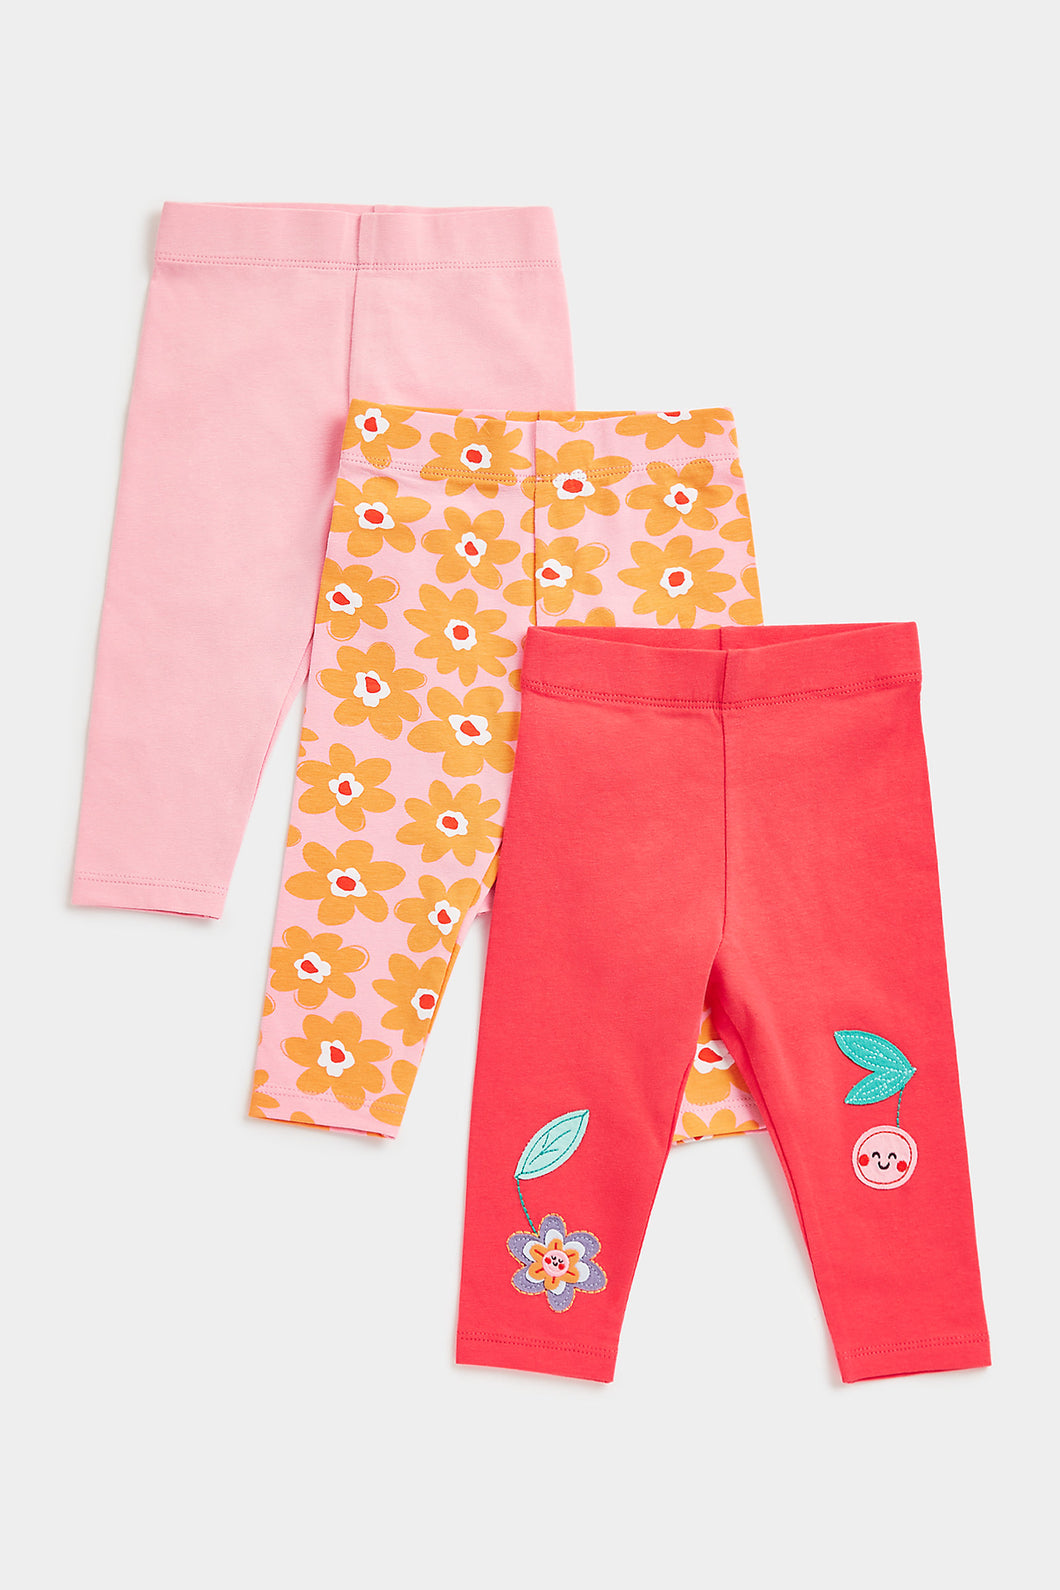 Mothercare Cherry Cropped Leggings - 3 Pack